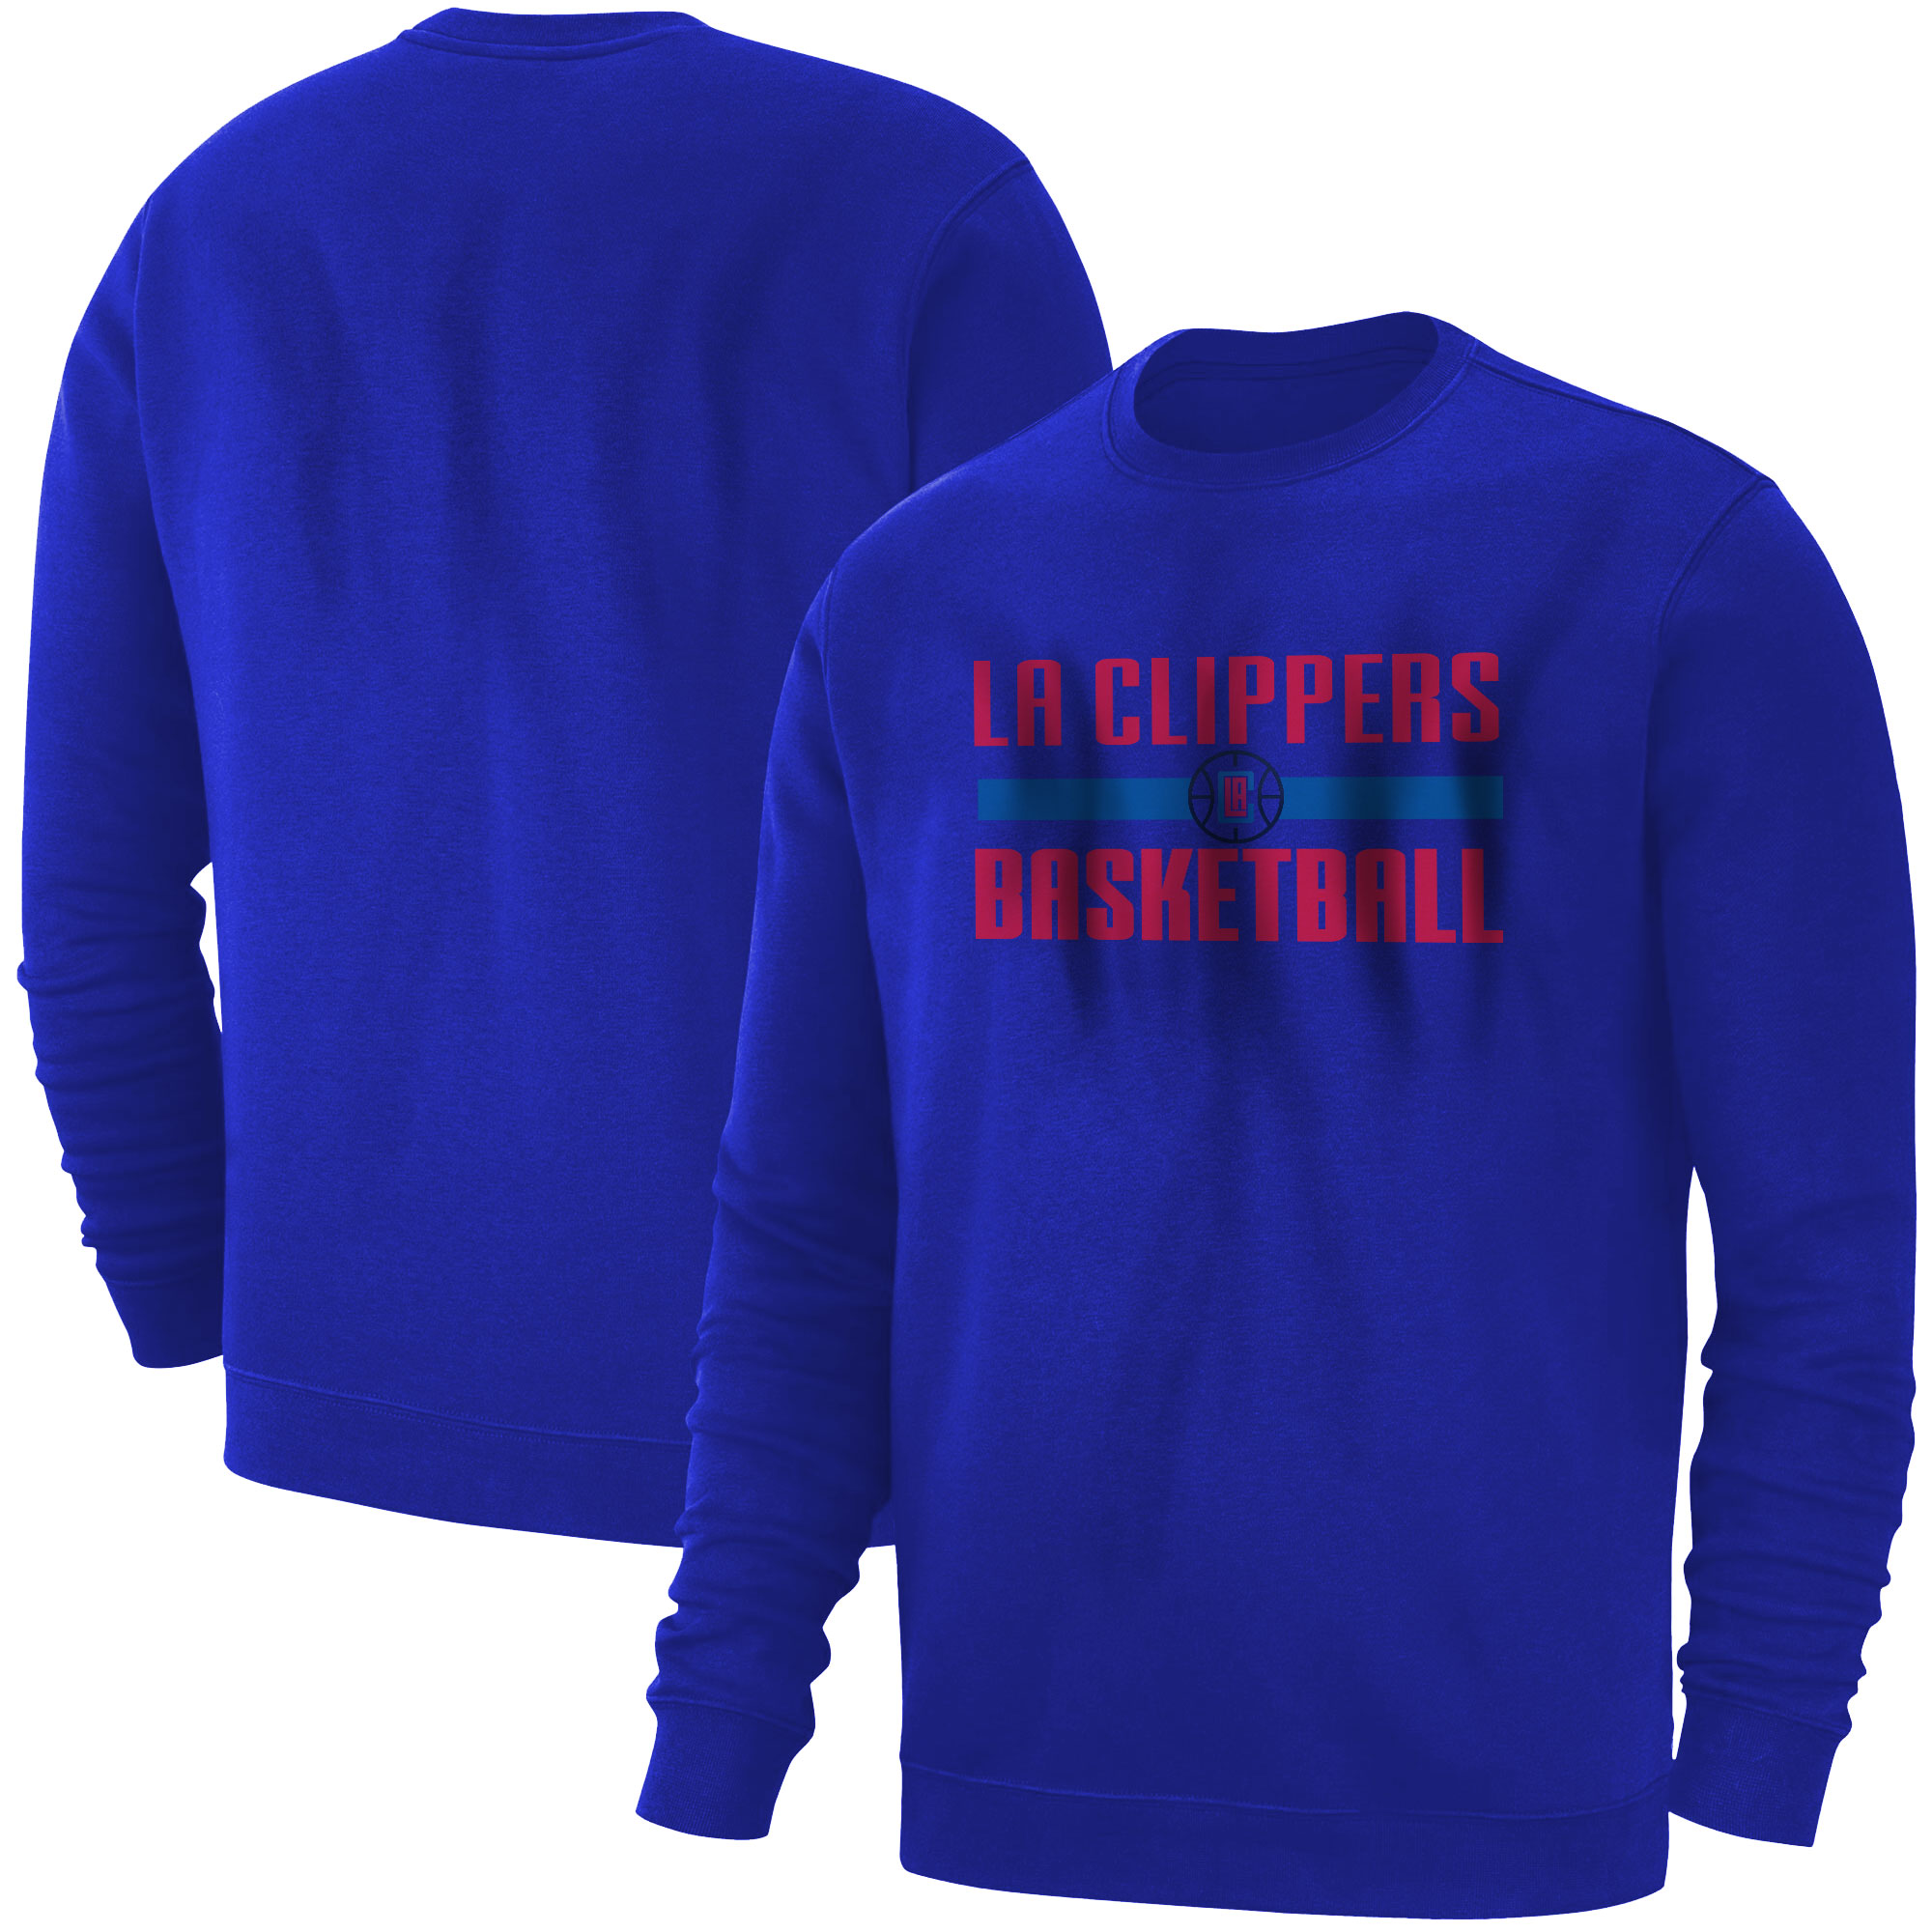 L.A. Clippers Basketball Basic (BSC-BLU-908)